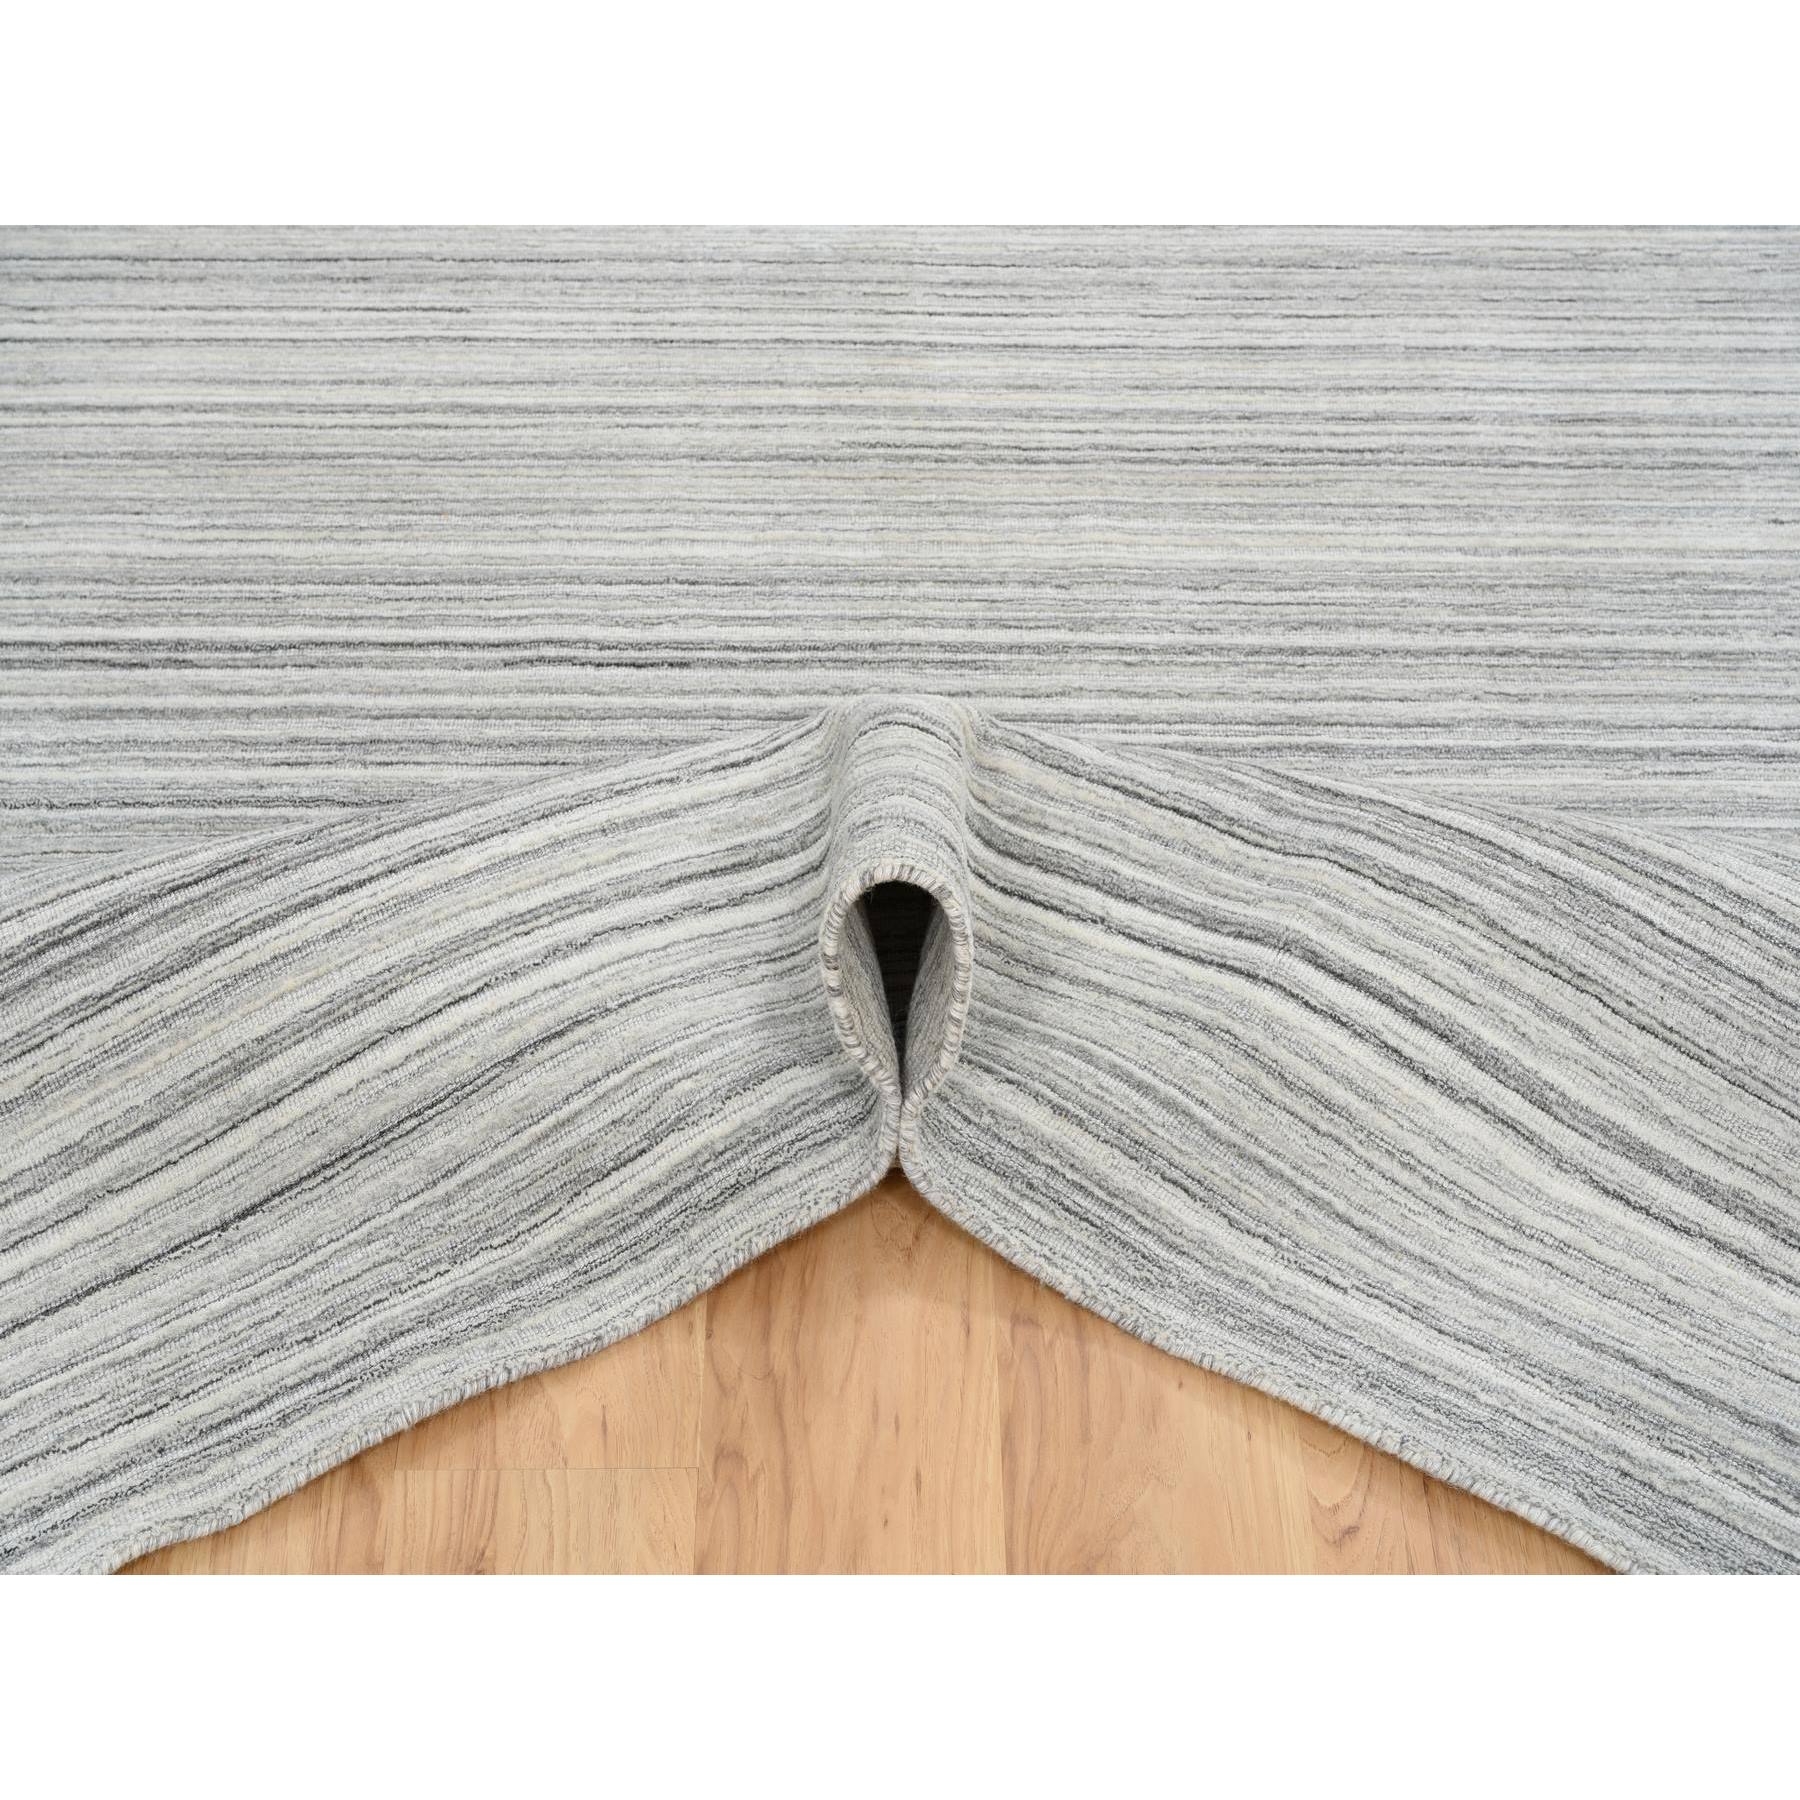 10'x10' Platinum Gray and Cream, Undyed Natural Wool Modern Design, Thick and Plush Plain Hand Loomed, Square Oriental Rug 